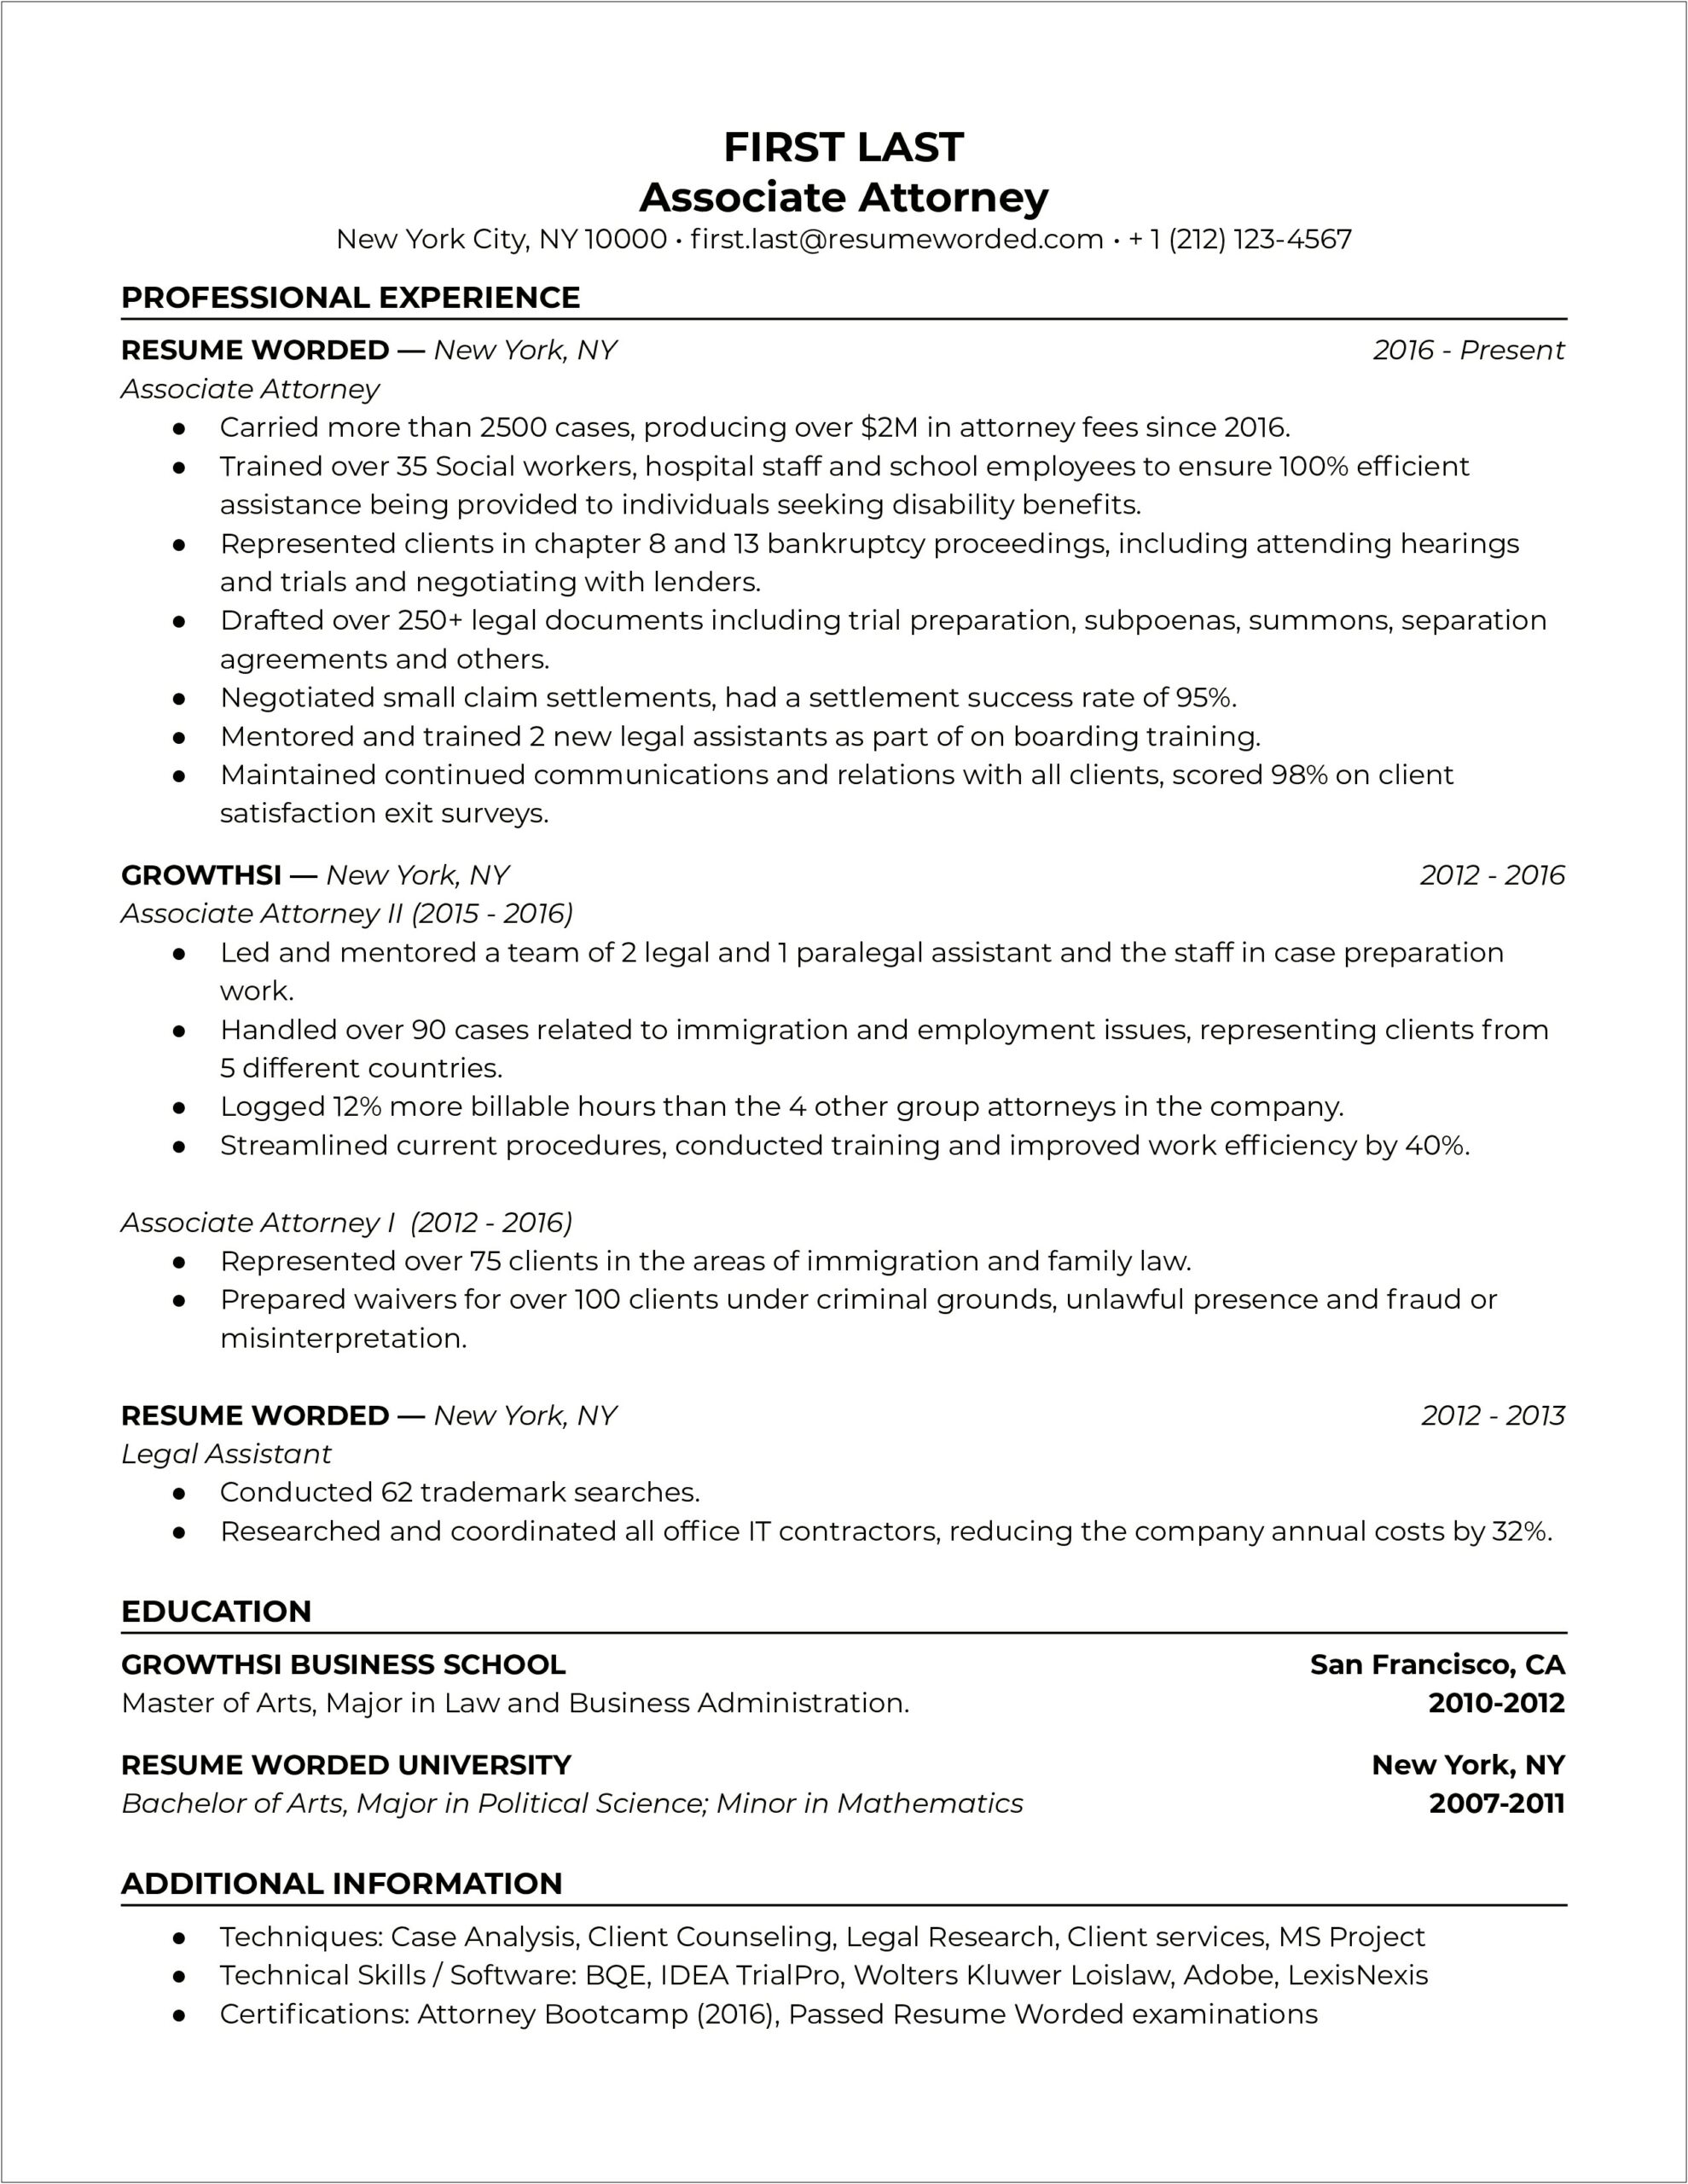 Sample Paralegal Resume With Bullet Points